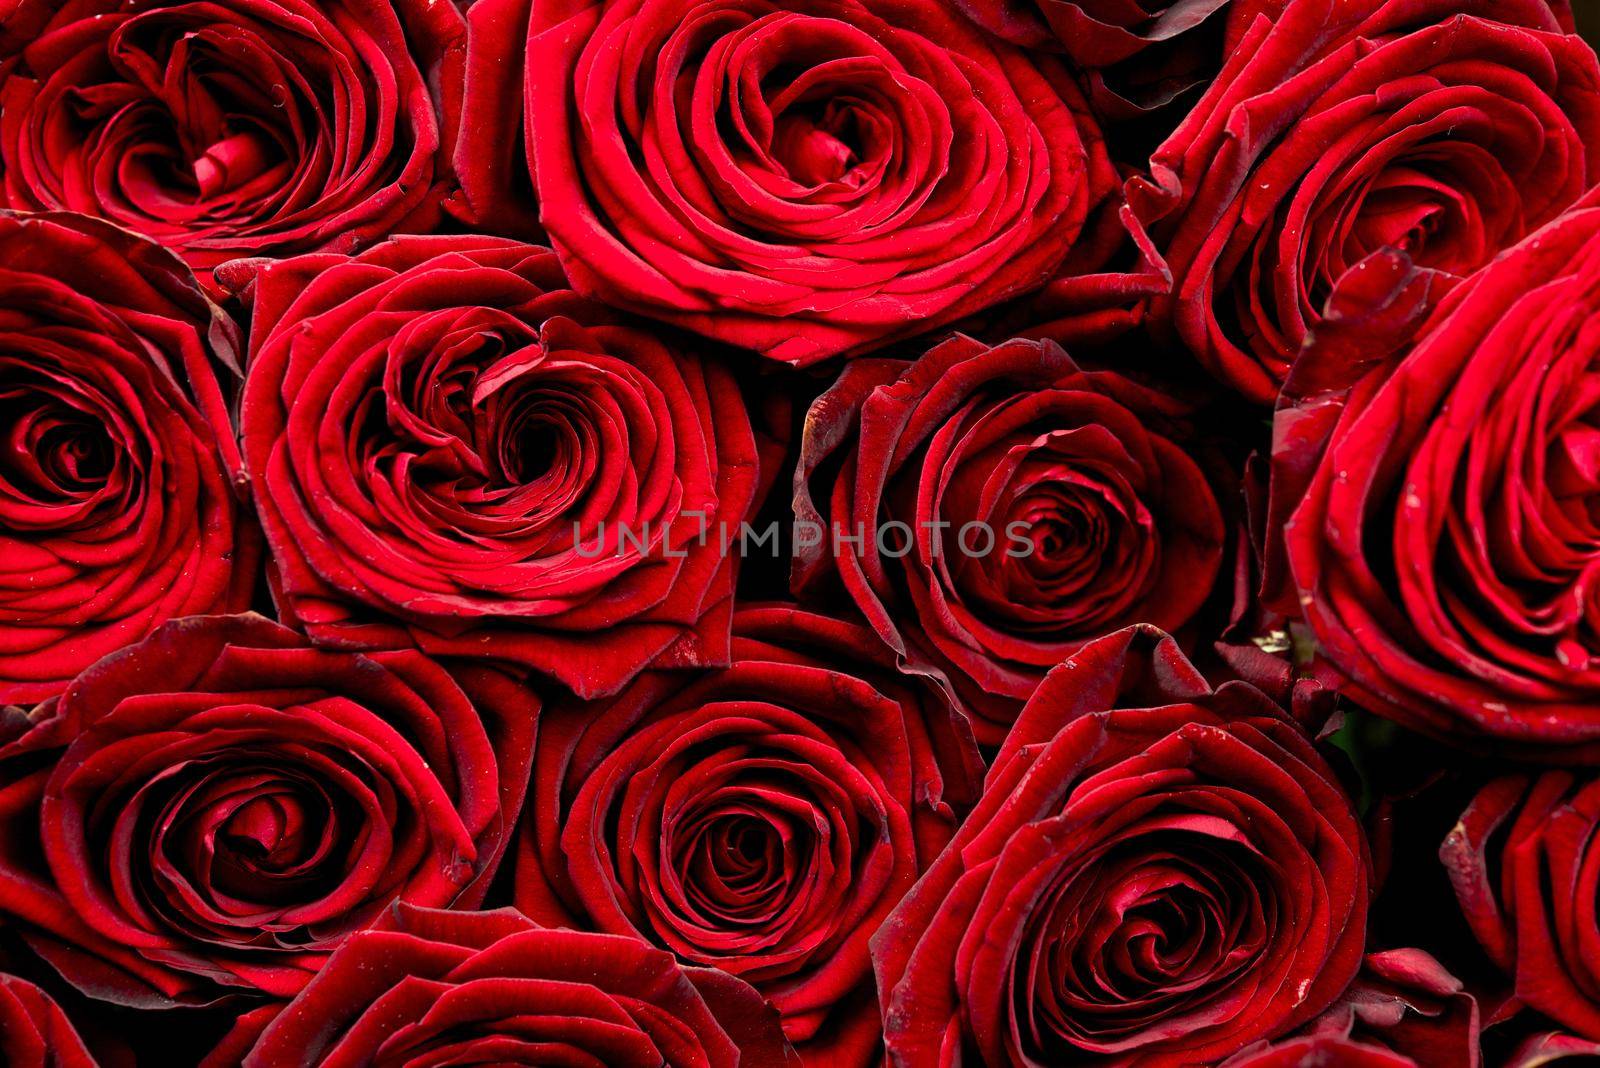 Bunch of Red Roses. Red Roses Background. Flowers Photo Collection.